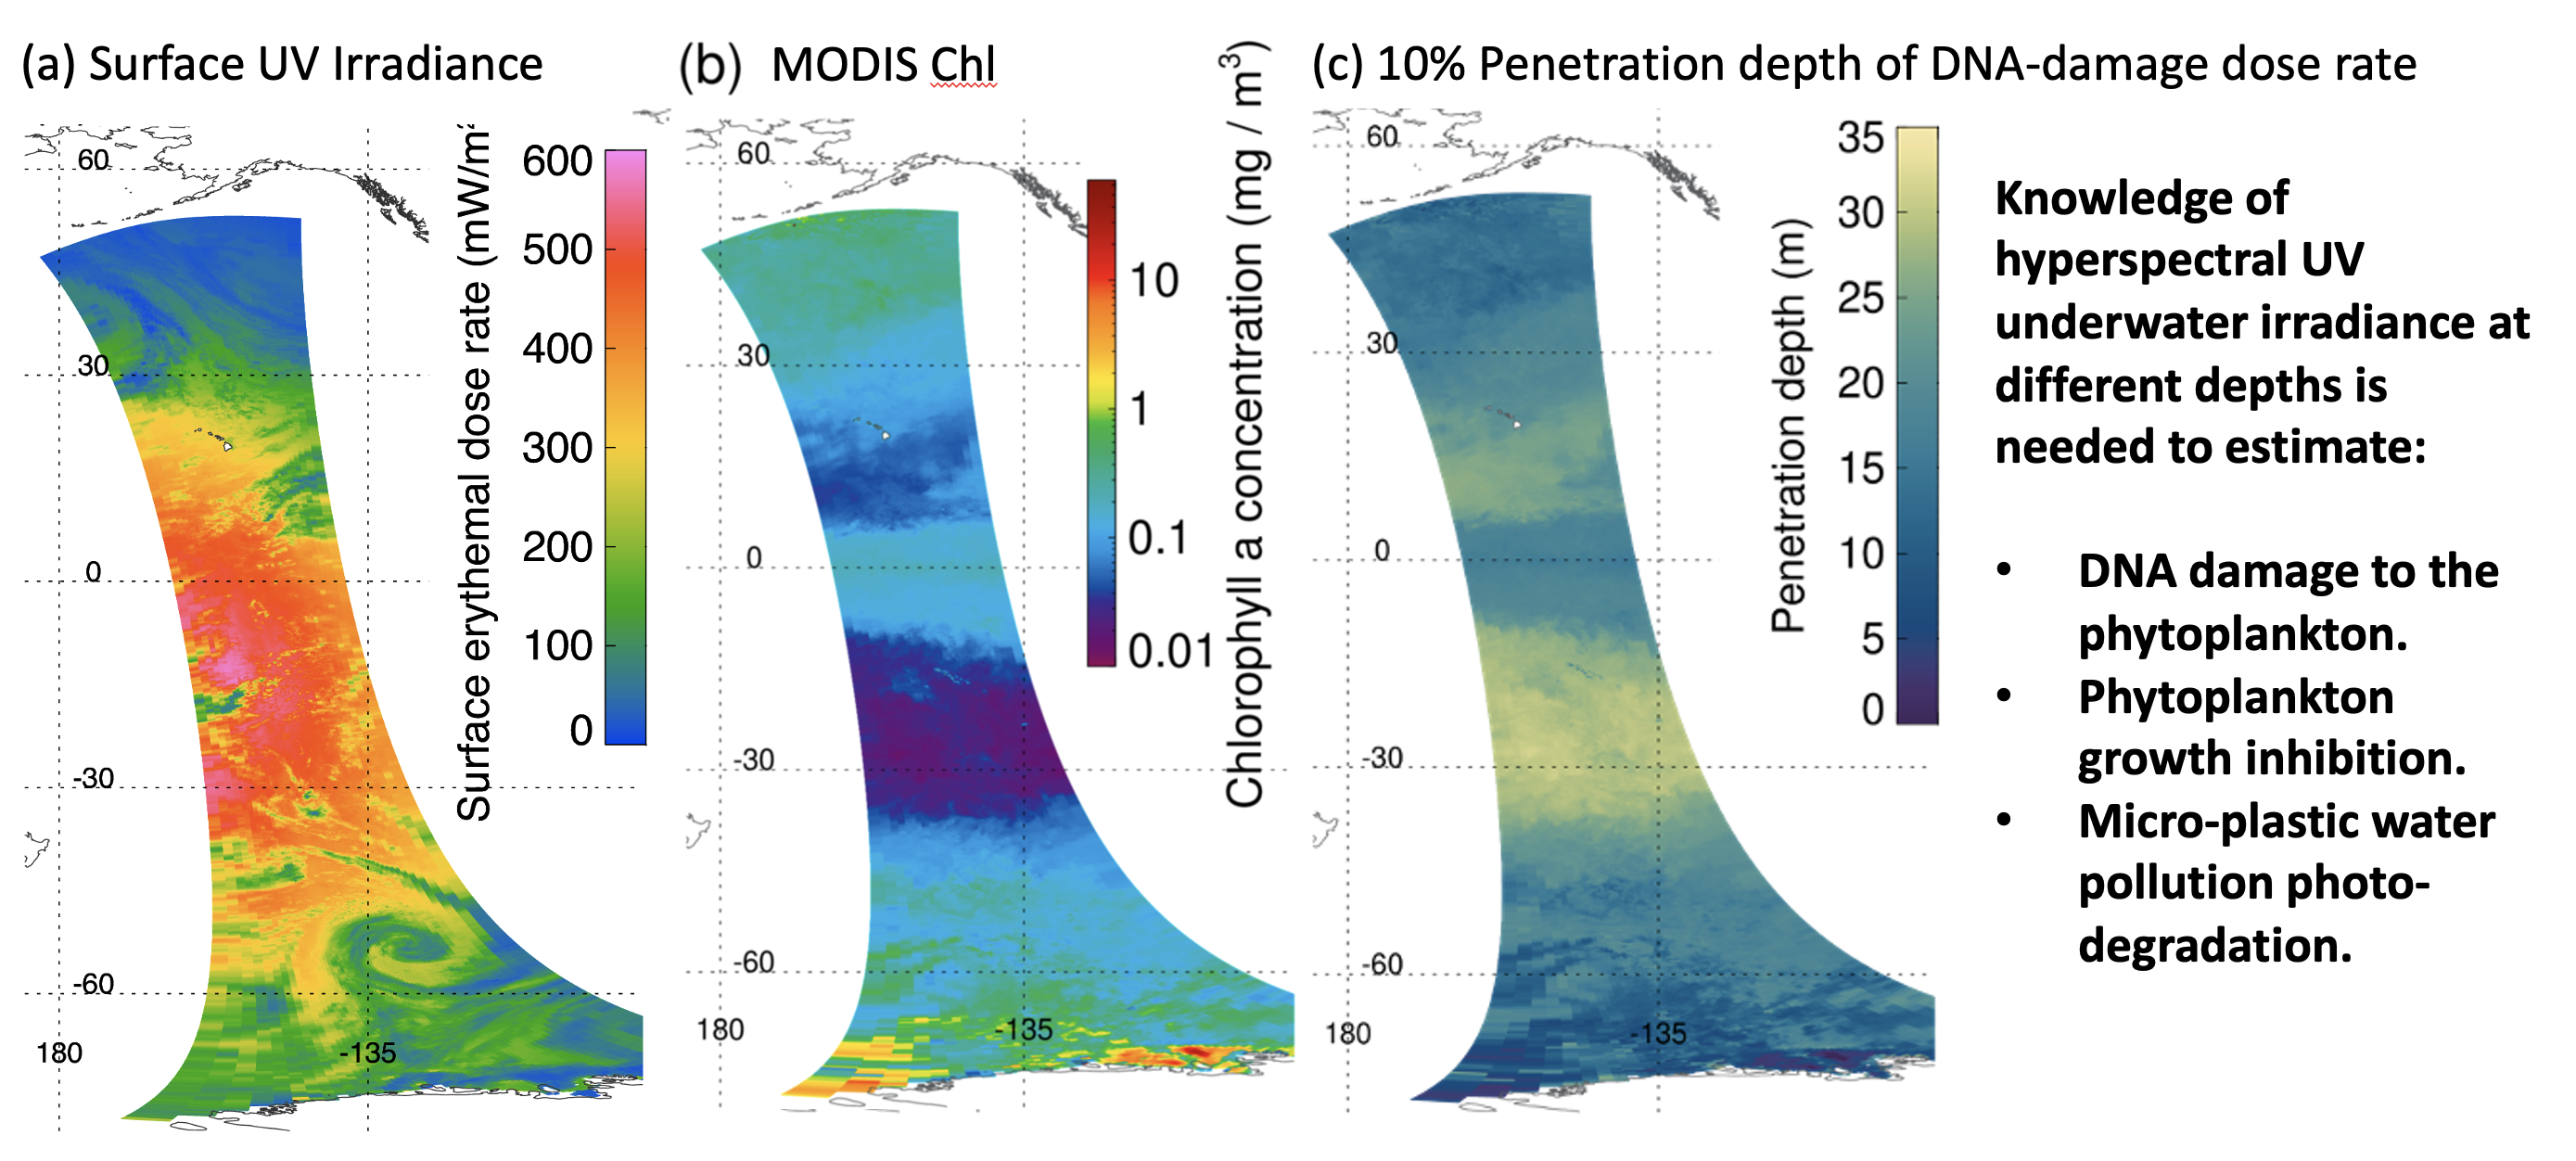 Knowledge of hyperspectral UV underwater irradiance at different depths 